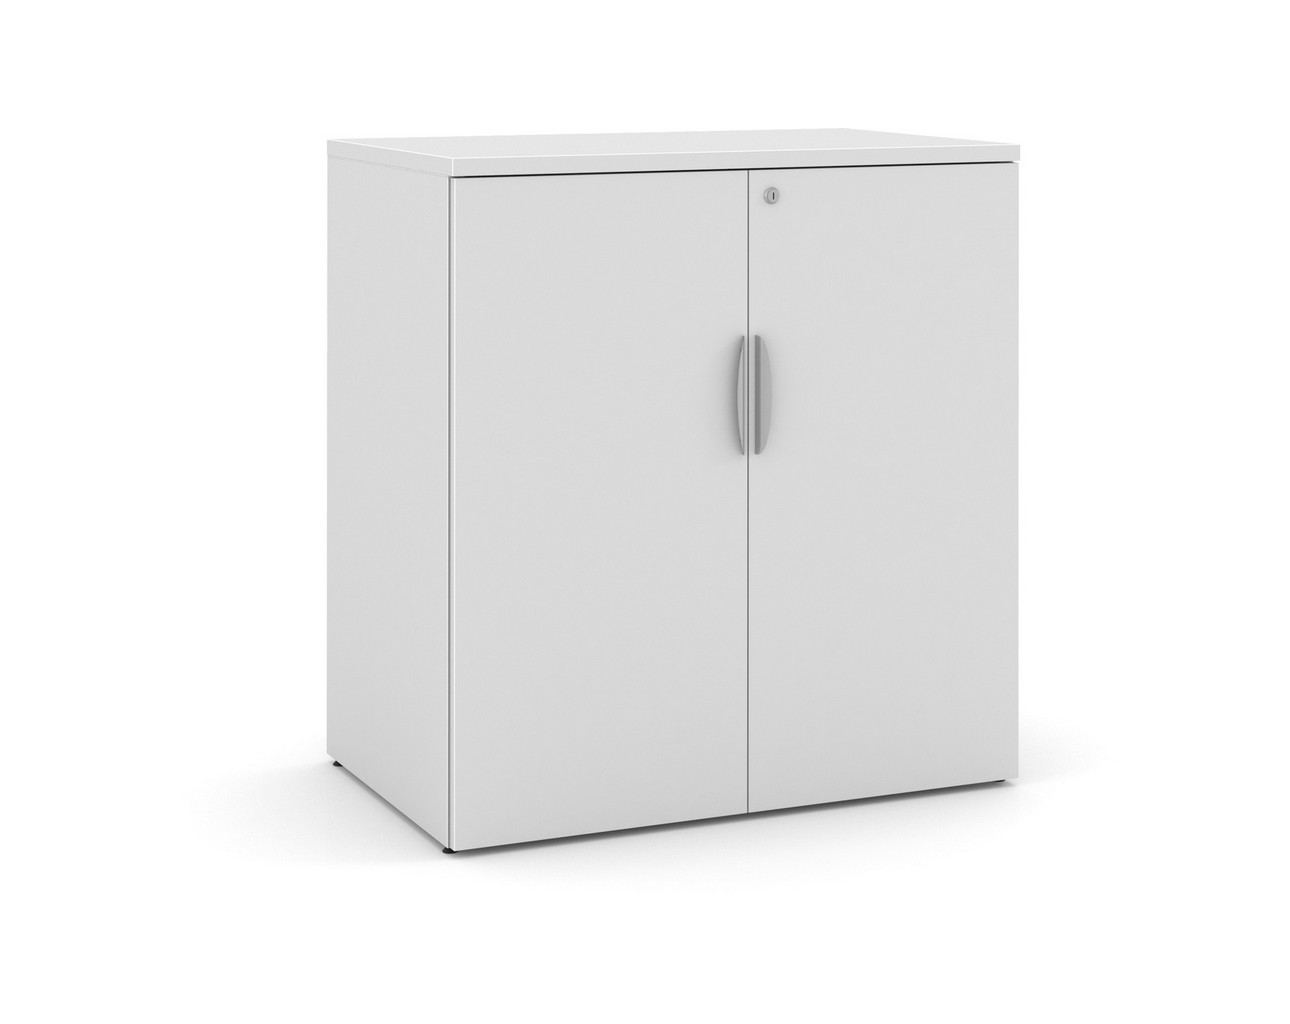 Locking Double Door Storage Cabinet 38 Inch with White Finish